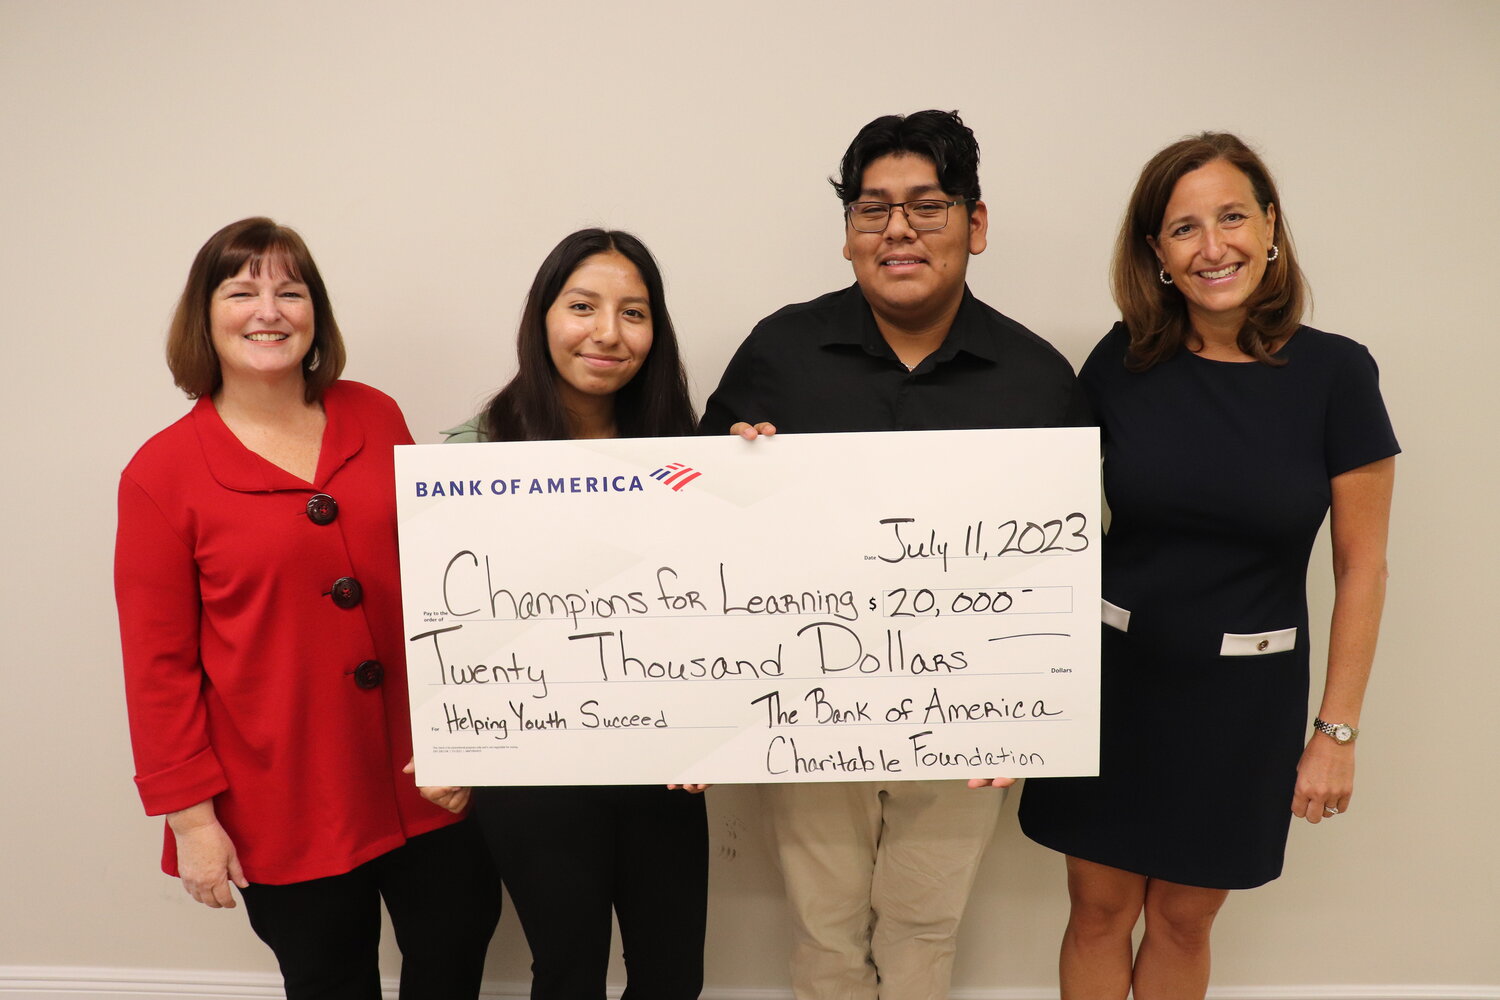 Bank of America Charitable Foundation present a $20,000 check to The Education Foundation of Collier County - Champions For Learning to help invest in students’ educational success.